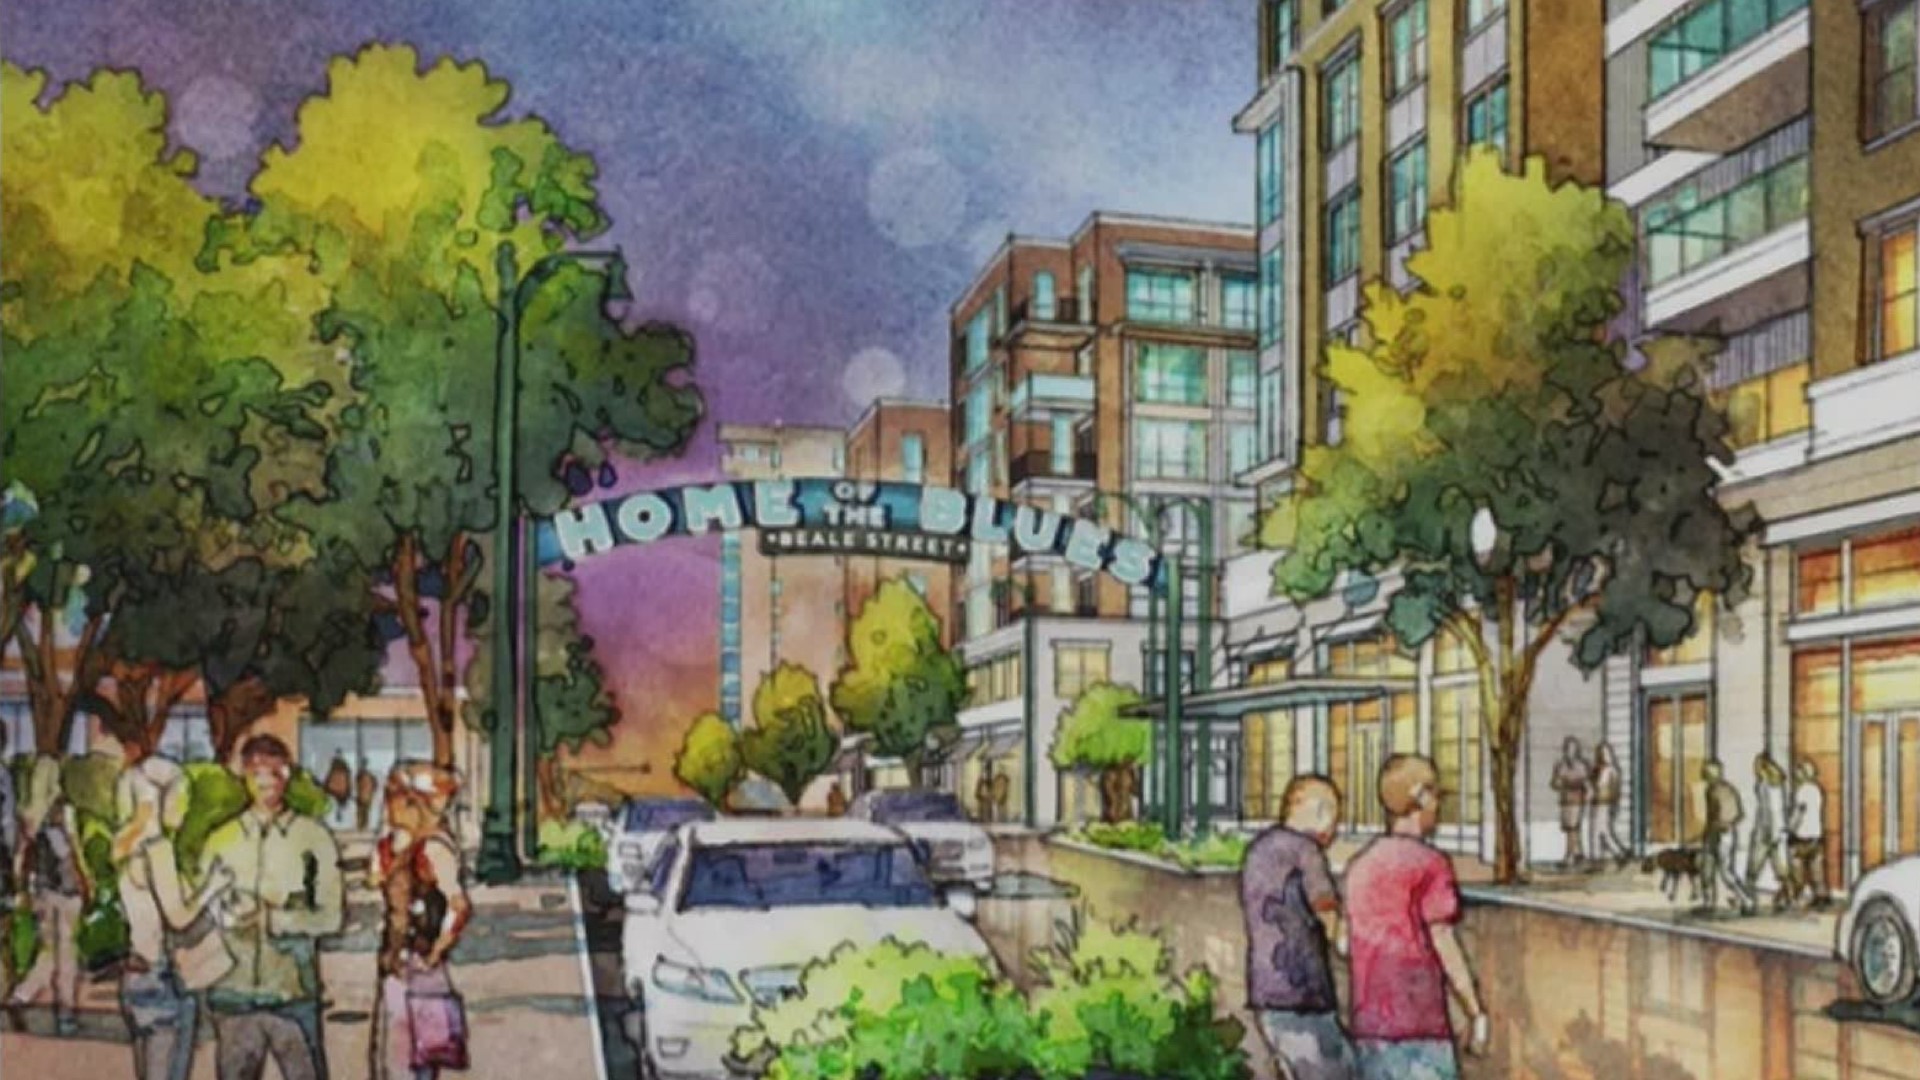 In the plan, Beale Street activity would expand and the current downtown MLGW site would turn into a residential, hospitality, office, and parking concept - while al